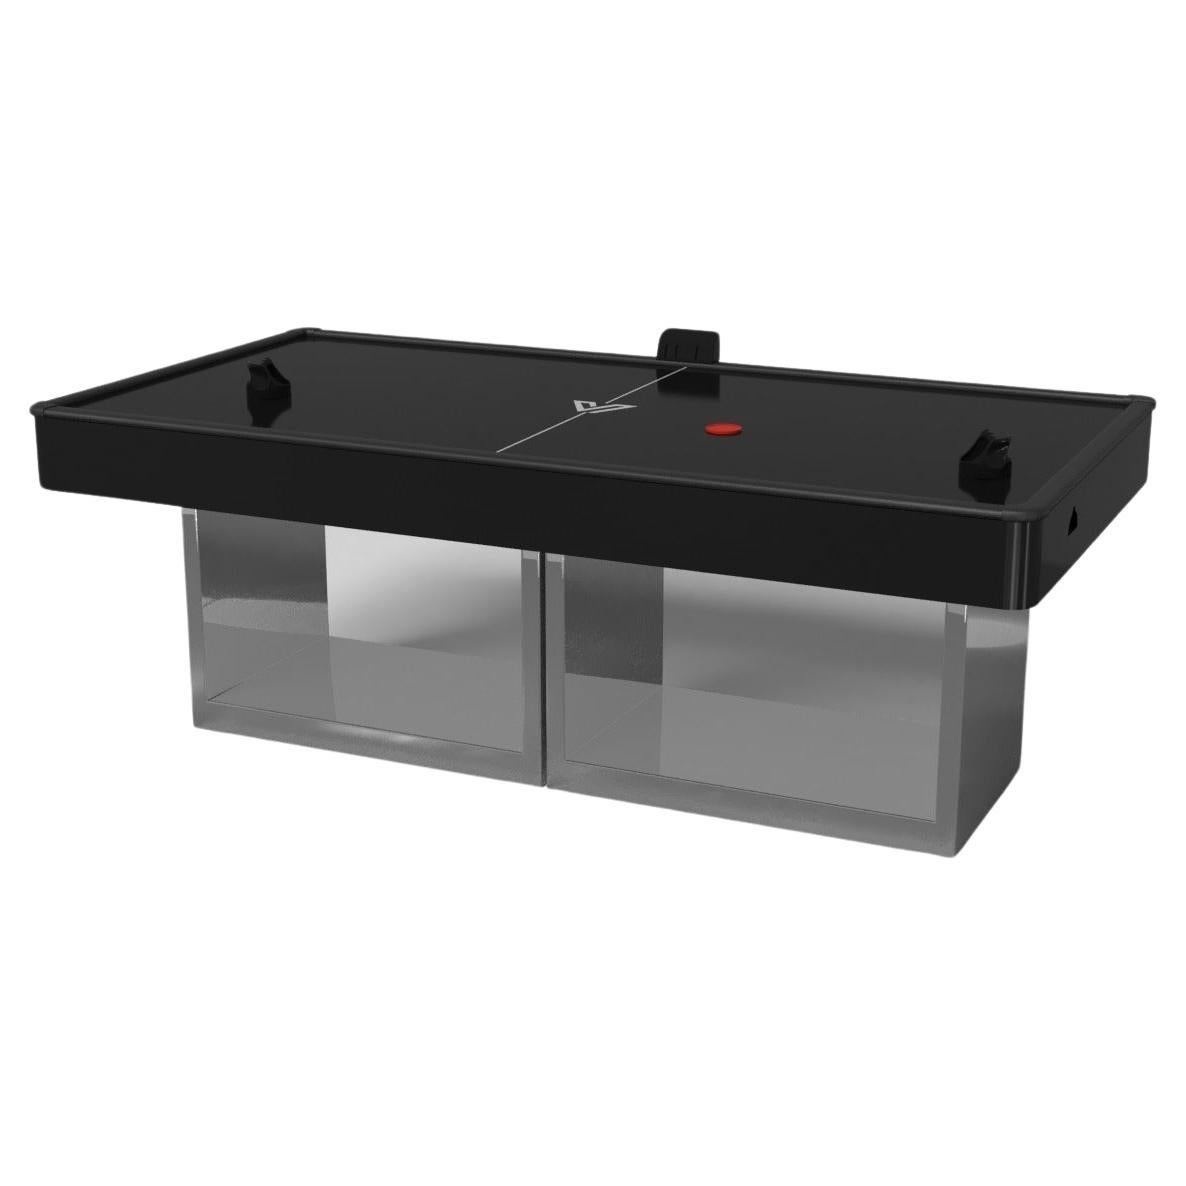 Elevate Customs Ambrosia Air Hockey Tables/Stainless Steel Sheet Metal in 7'-USA